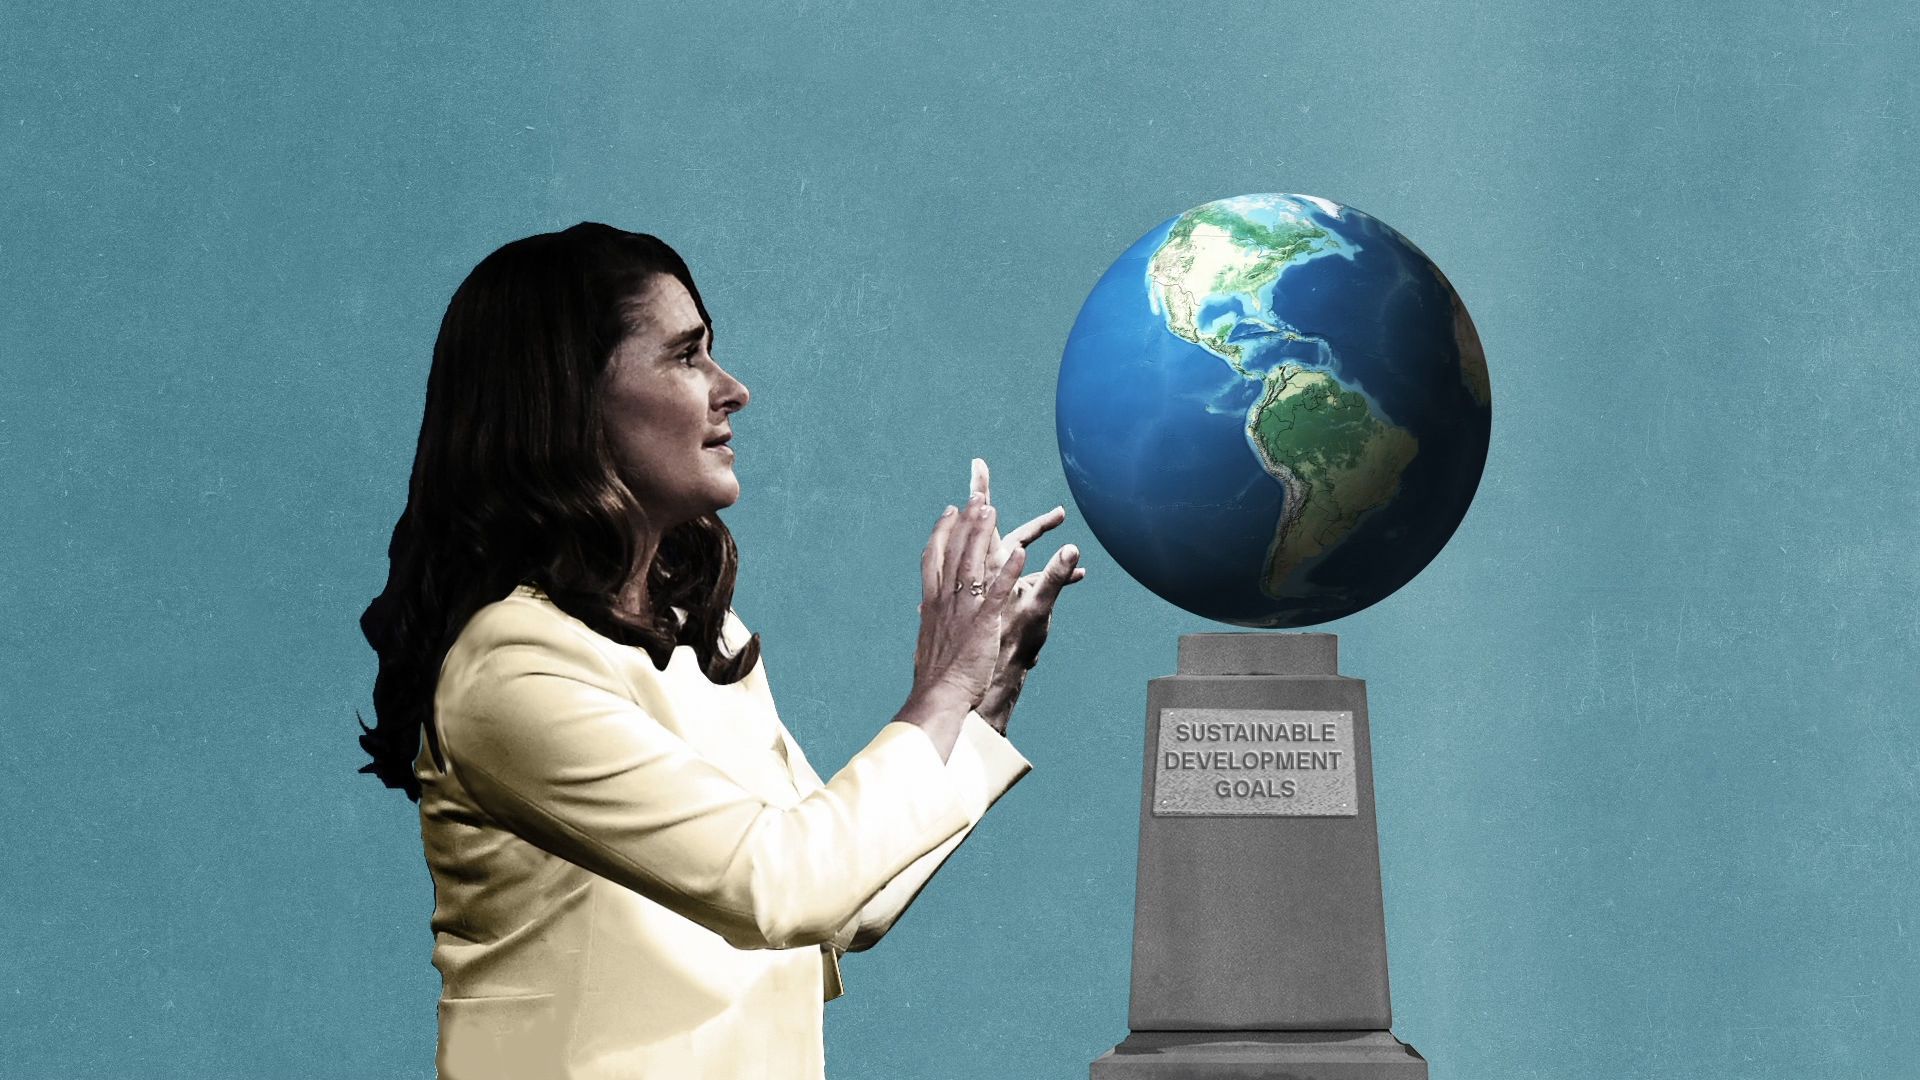 Illustration of Melinda Gates reaching towards a globe on a pedestal that reads "sustainable development goals"